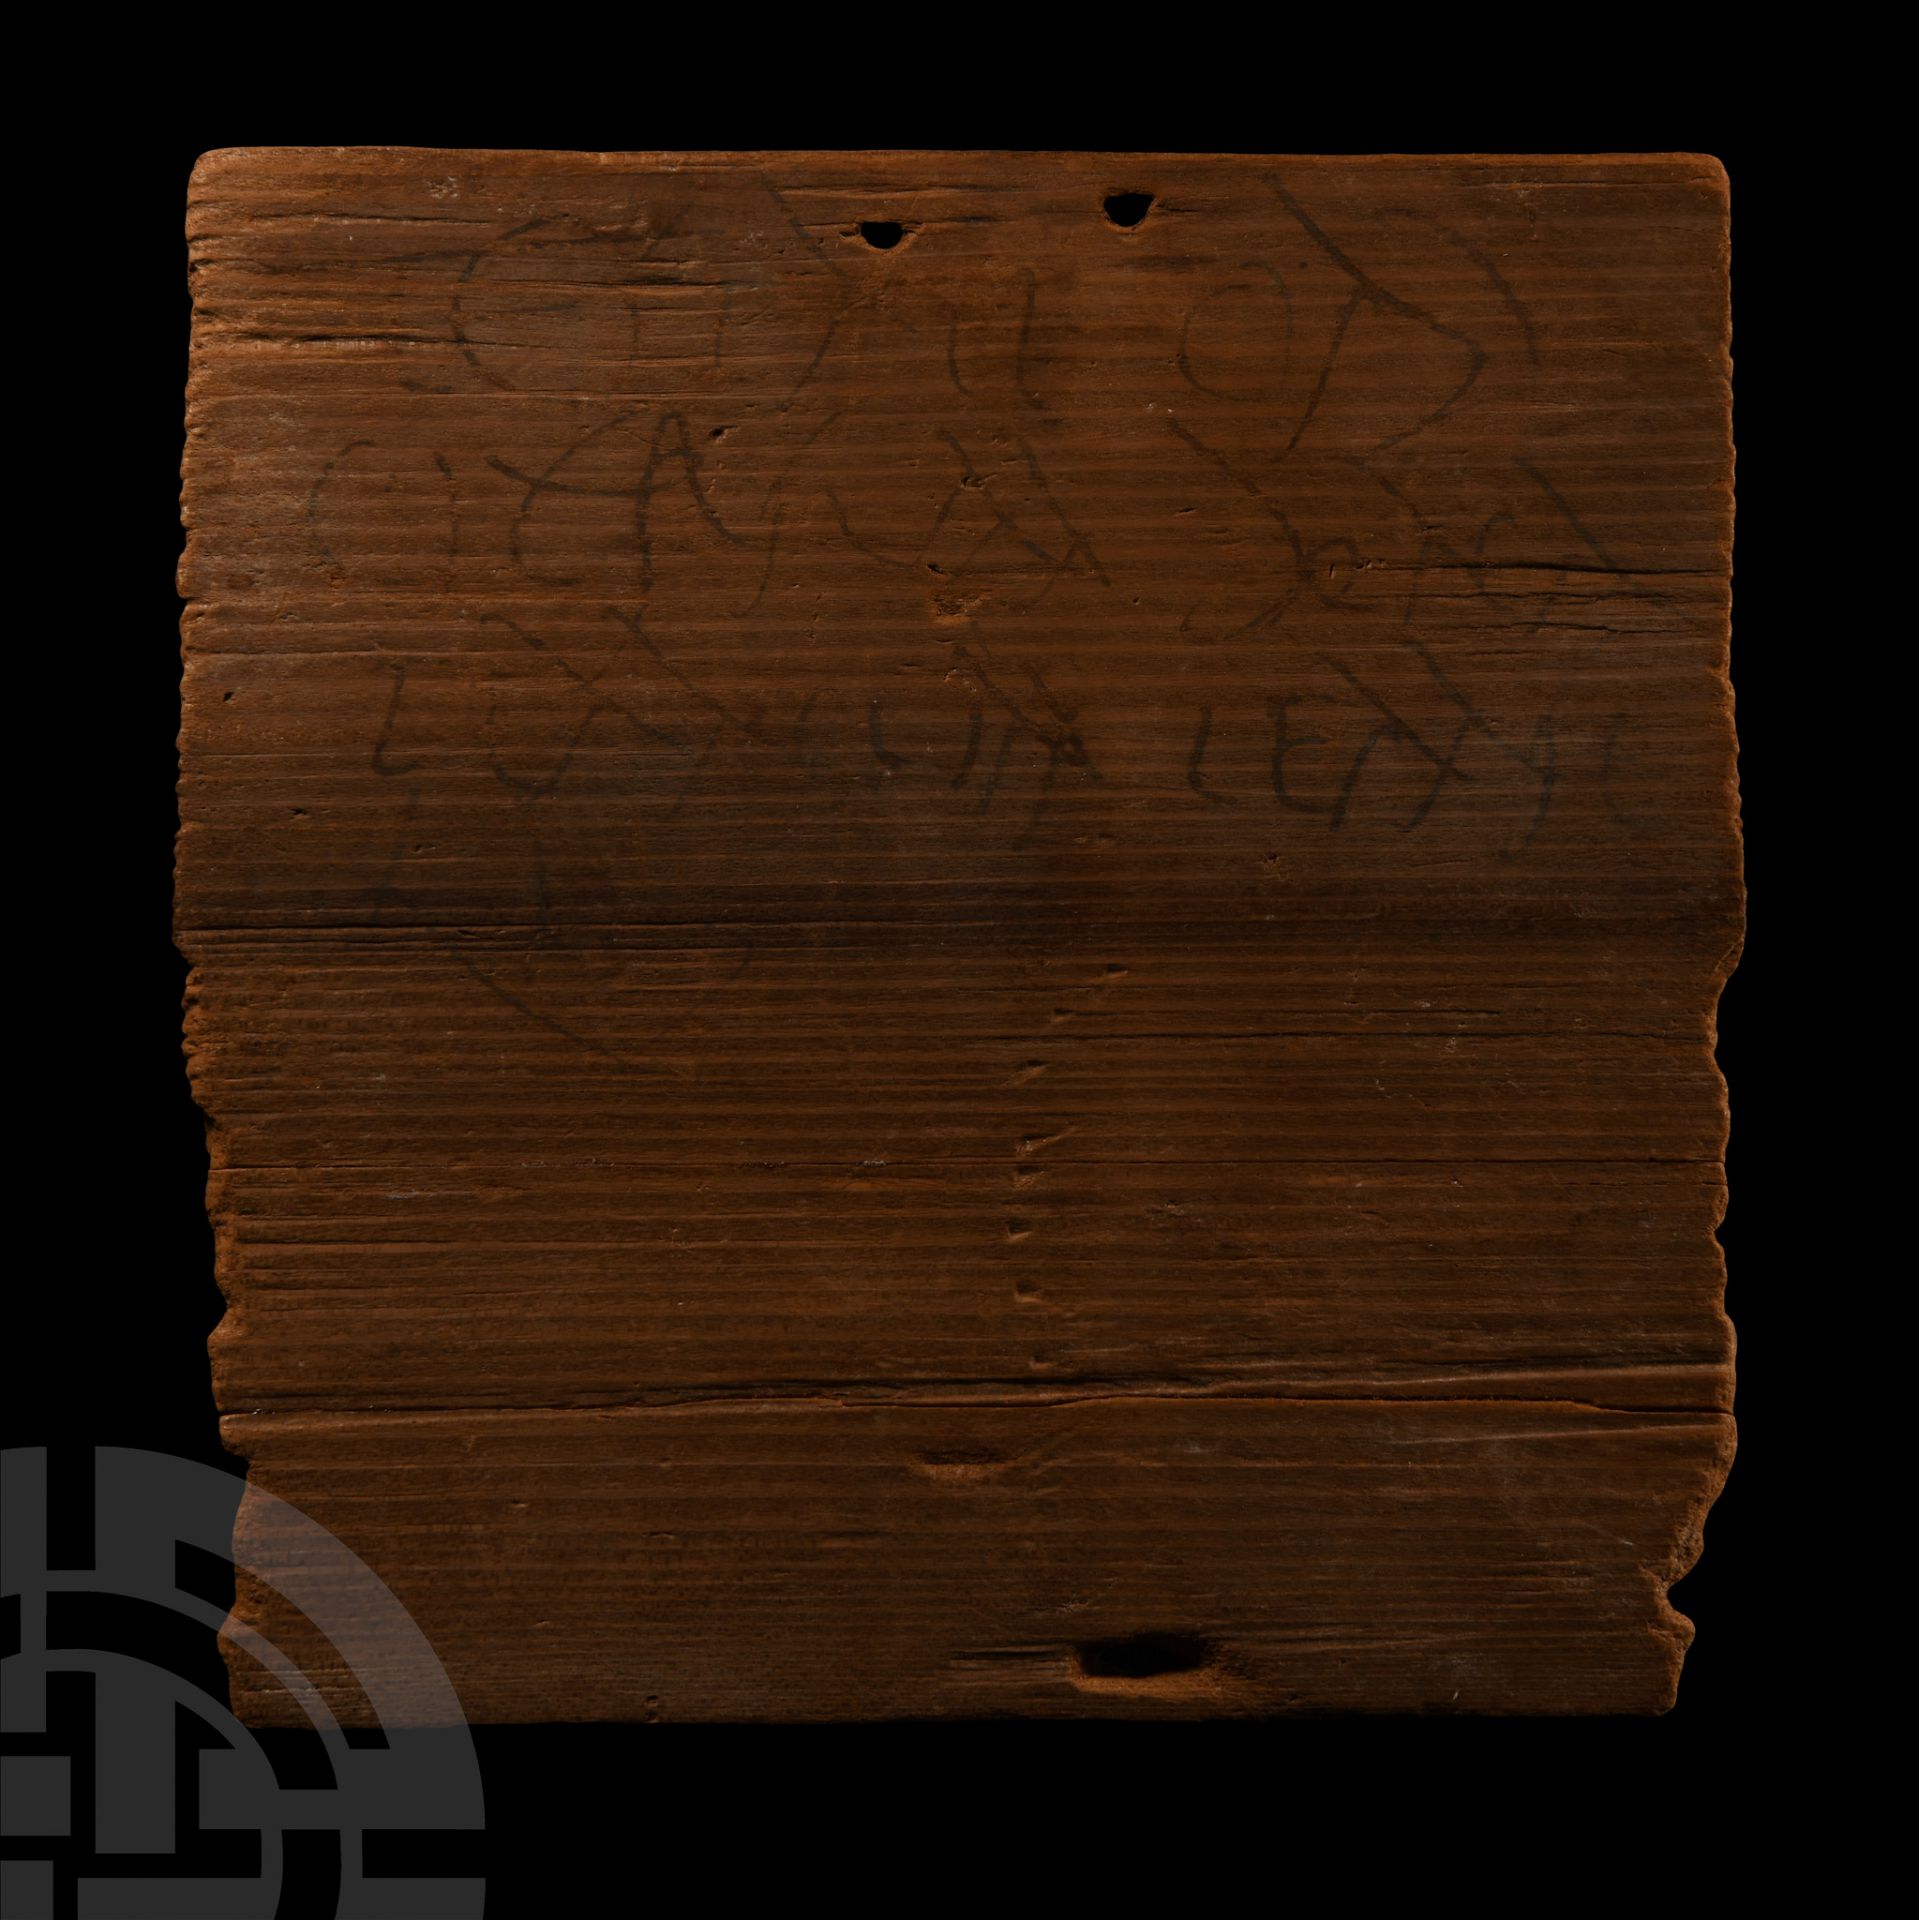 Roman Inscribed Wooden Wax Tablet, a Legal Document - Image 3 of 3